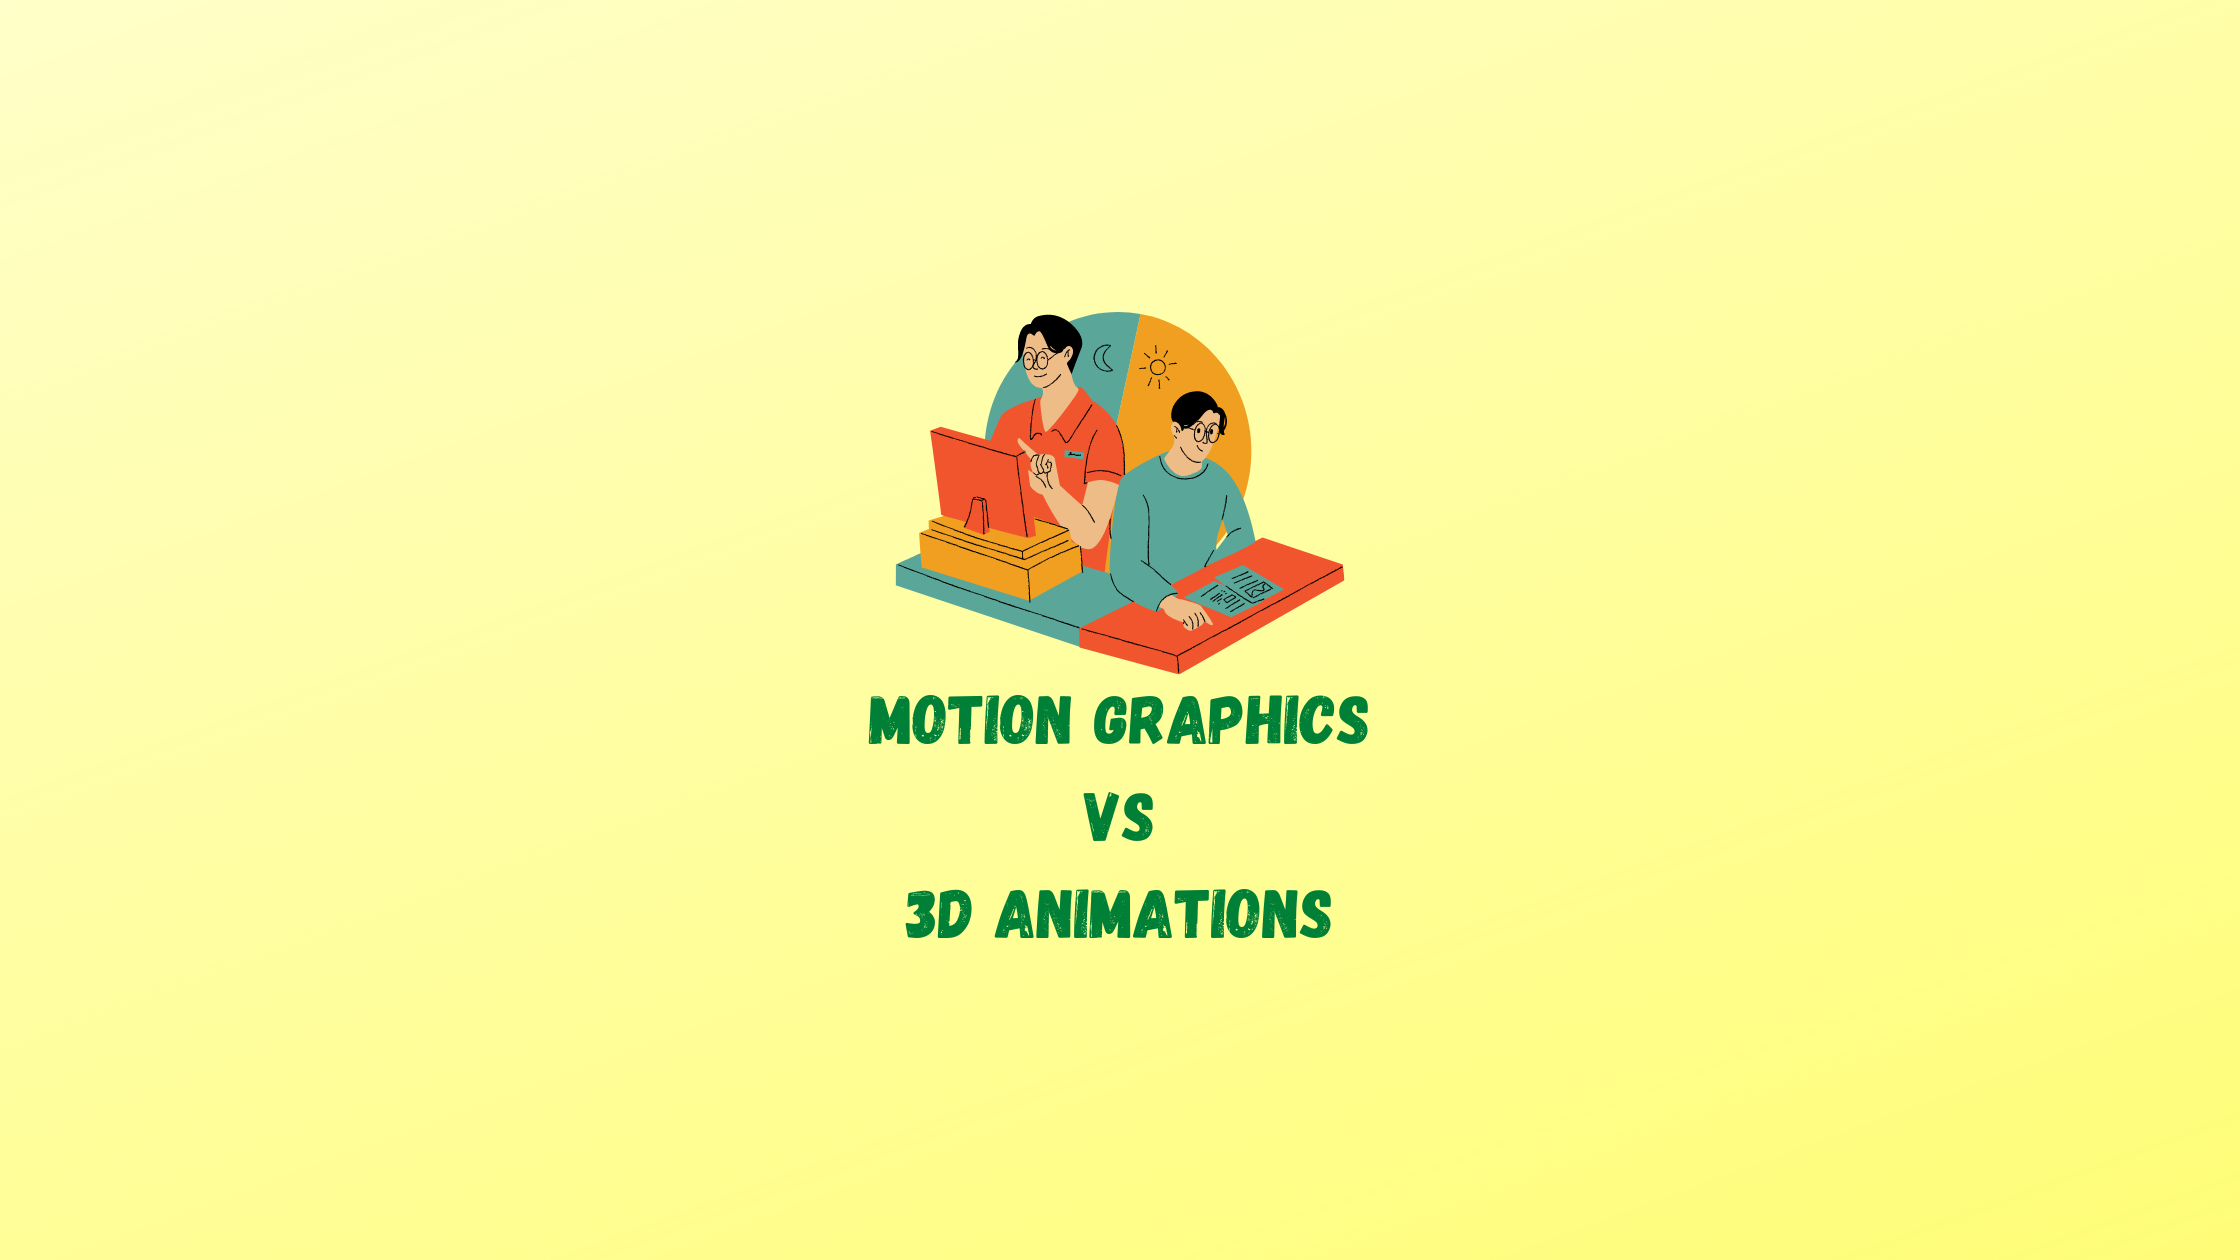 motion graphics vs 3d animations